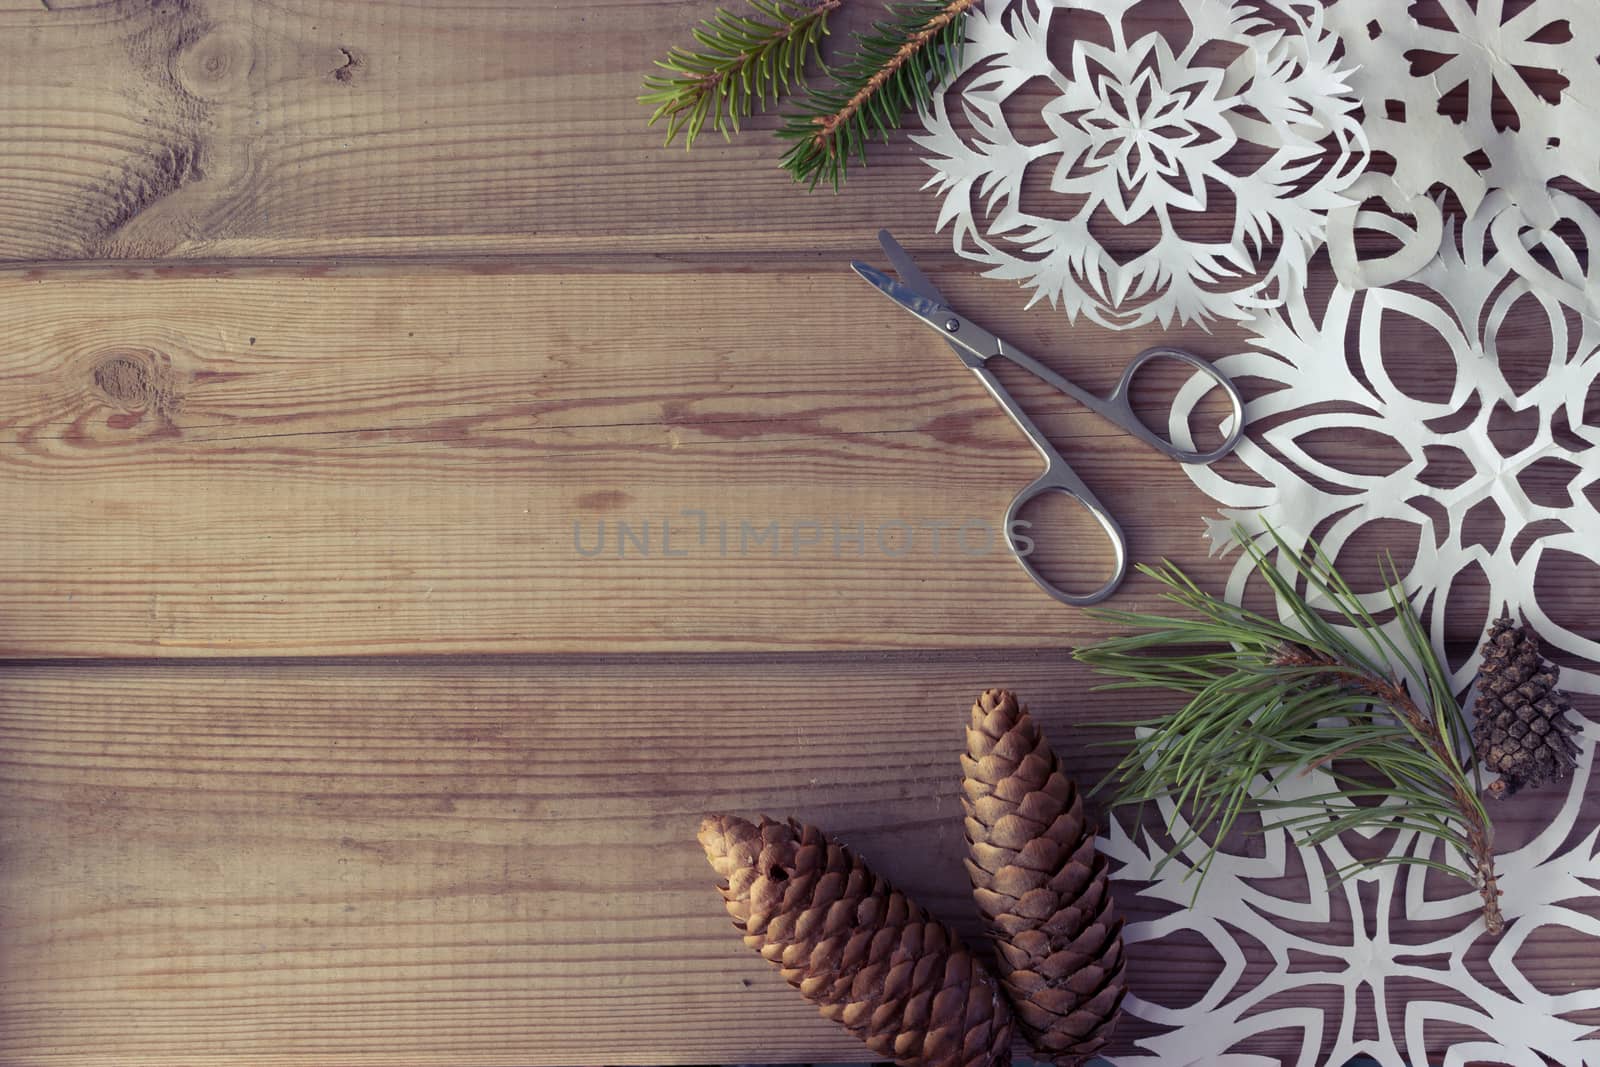 handmade paper snowflakes Christmas tree branches by liwei12